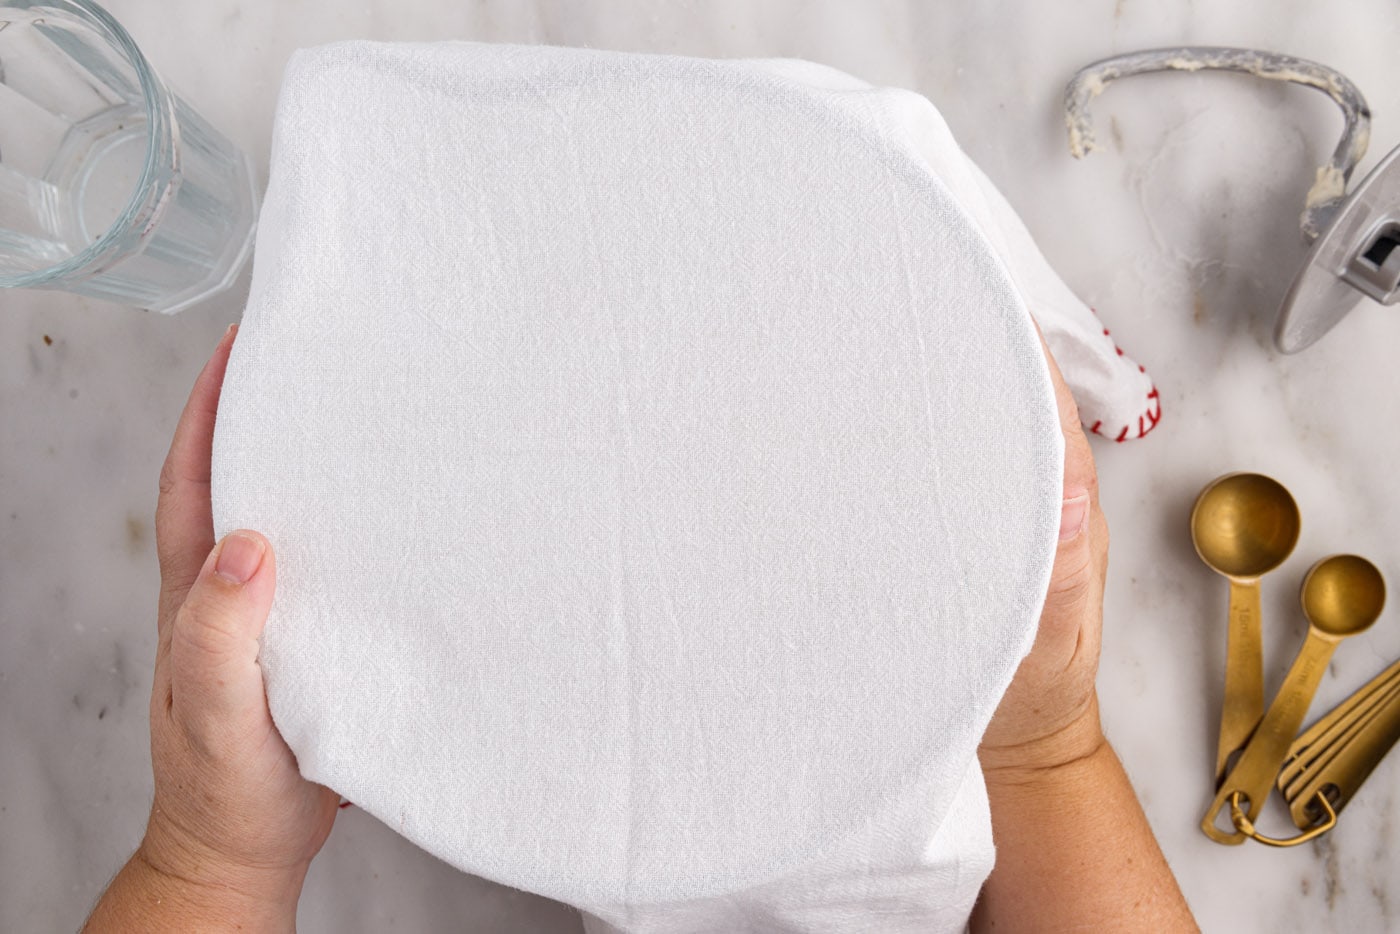 covering bread dough with a kitchen towel